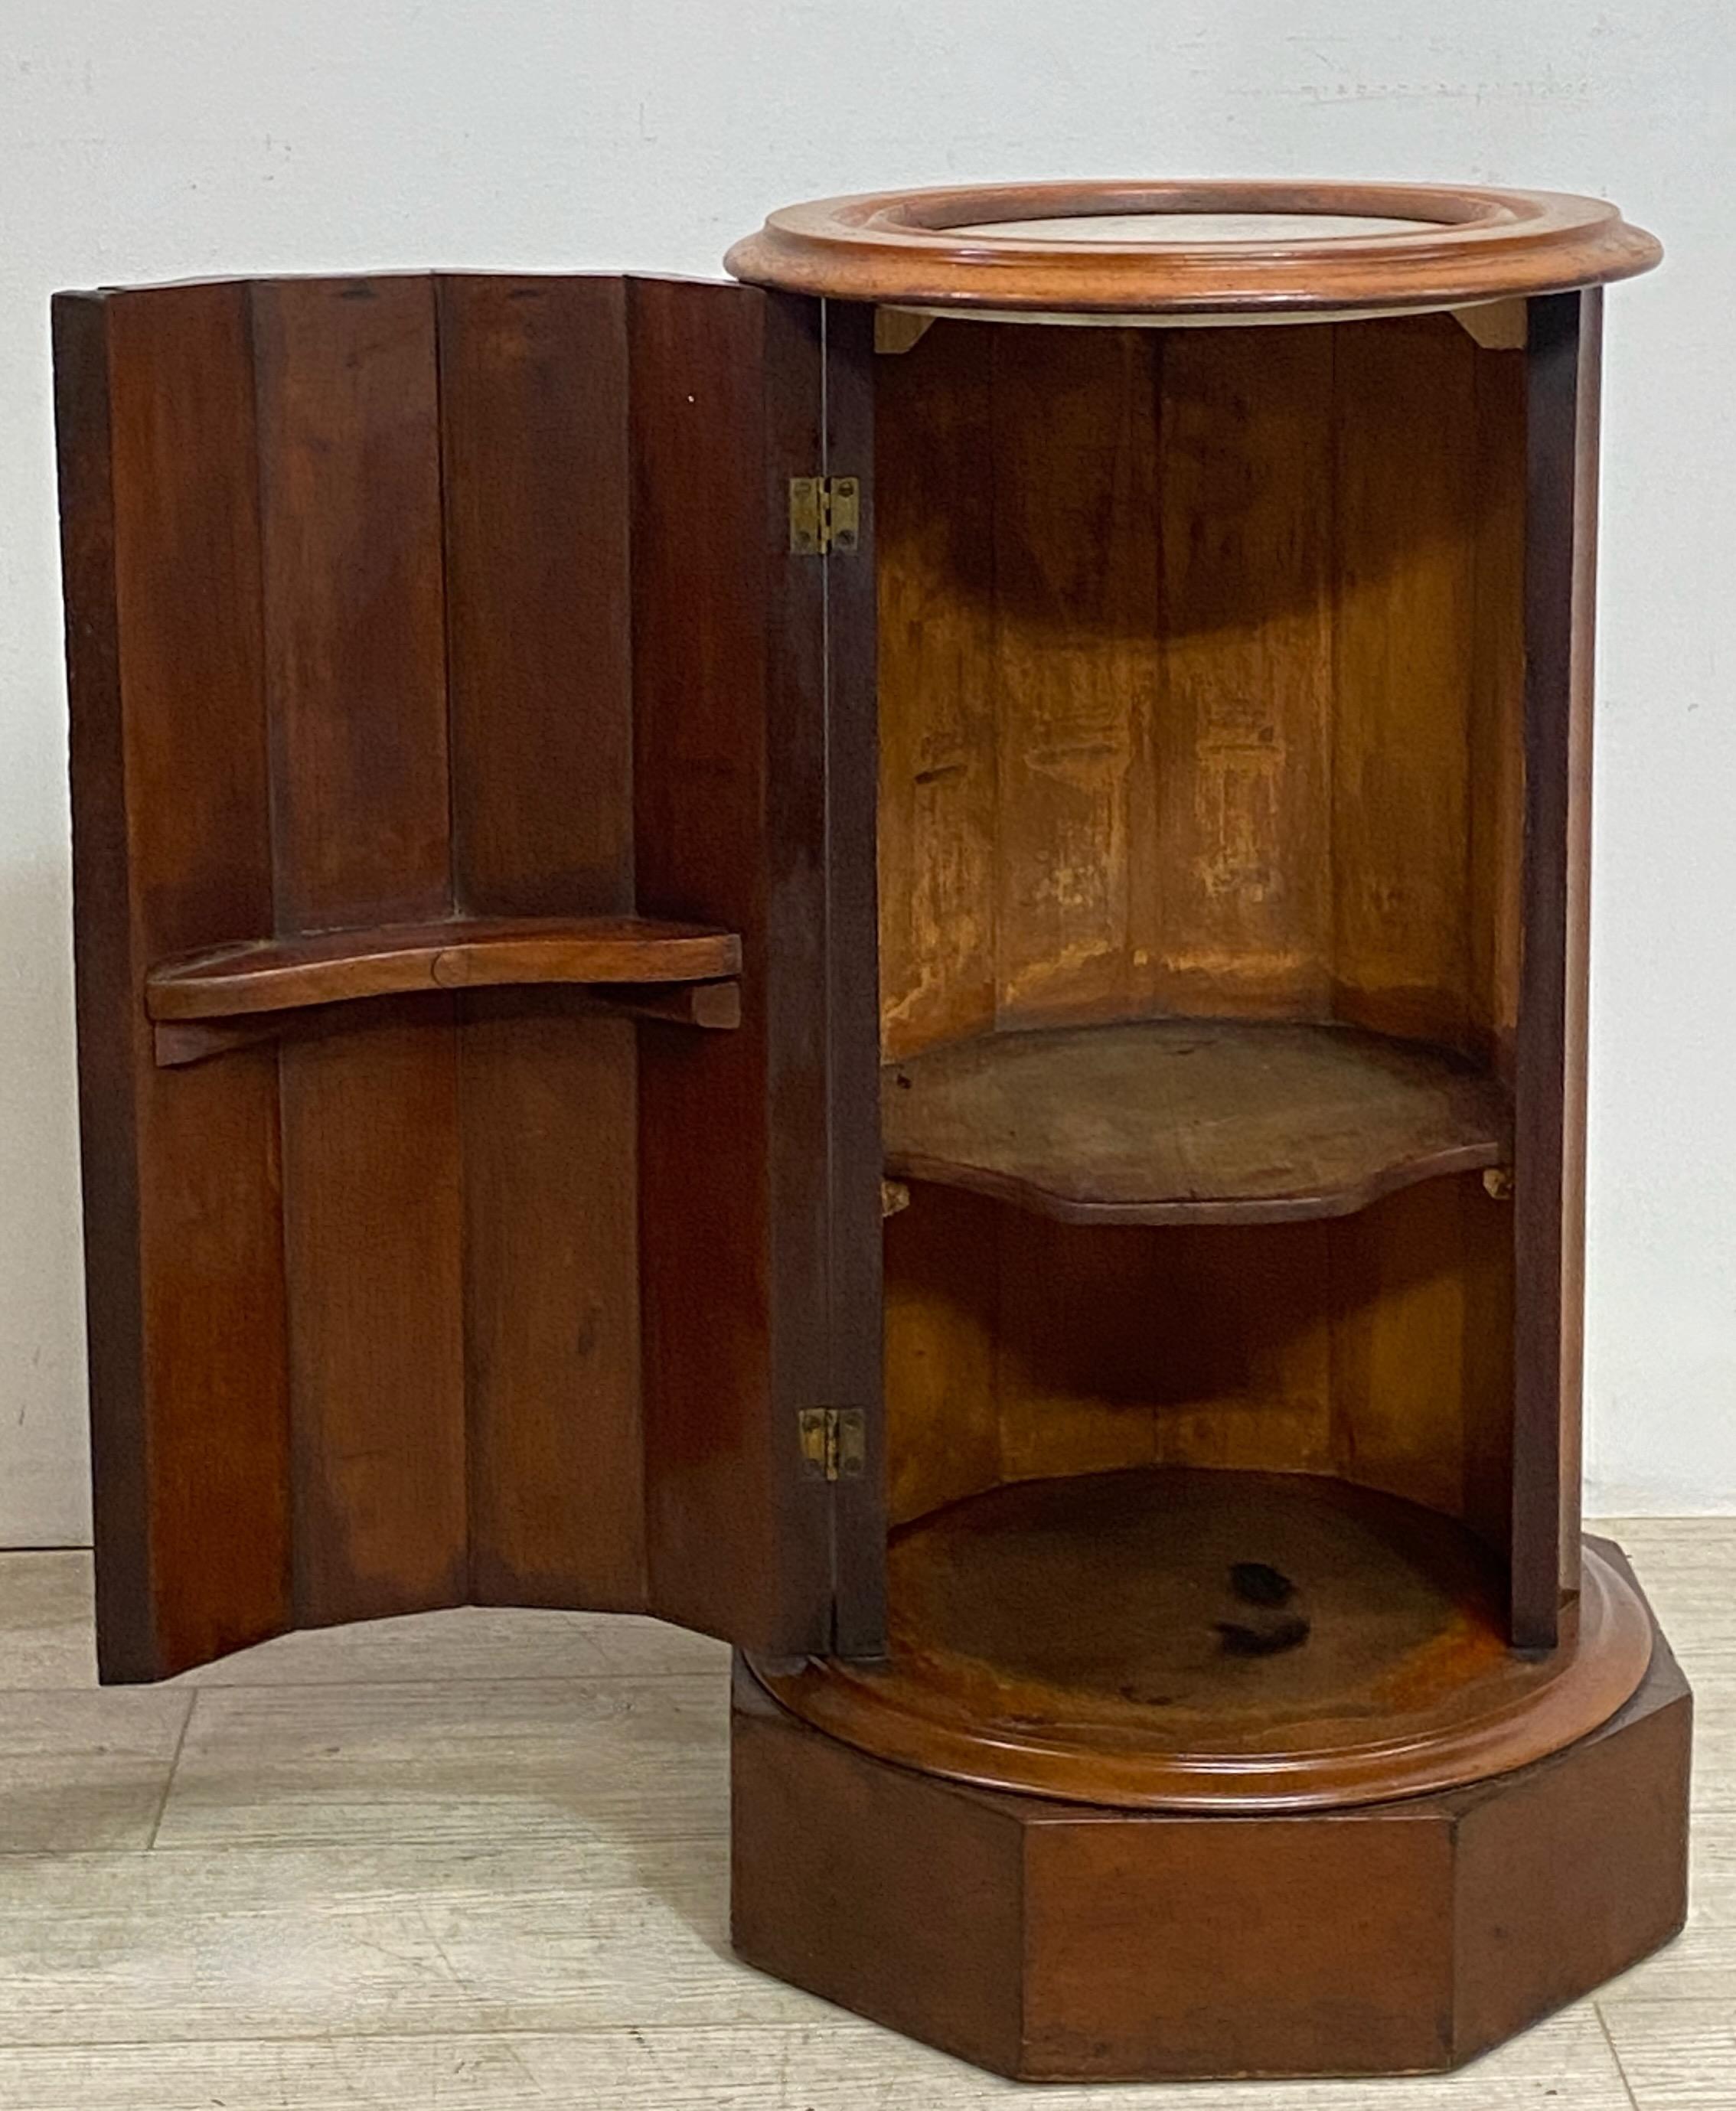 British 19th Century English Mahogany Pot Cupboard Bedside Commode Table For Sale